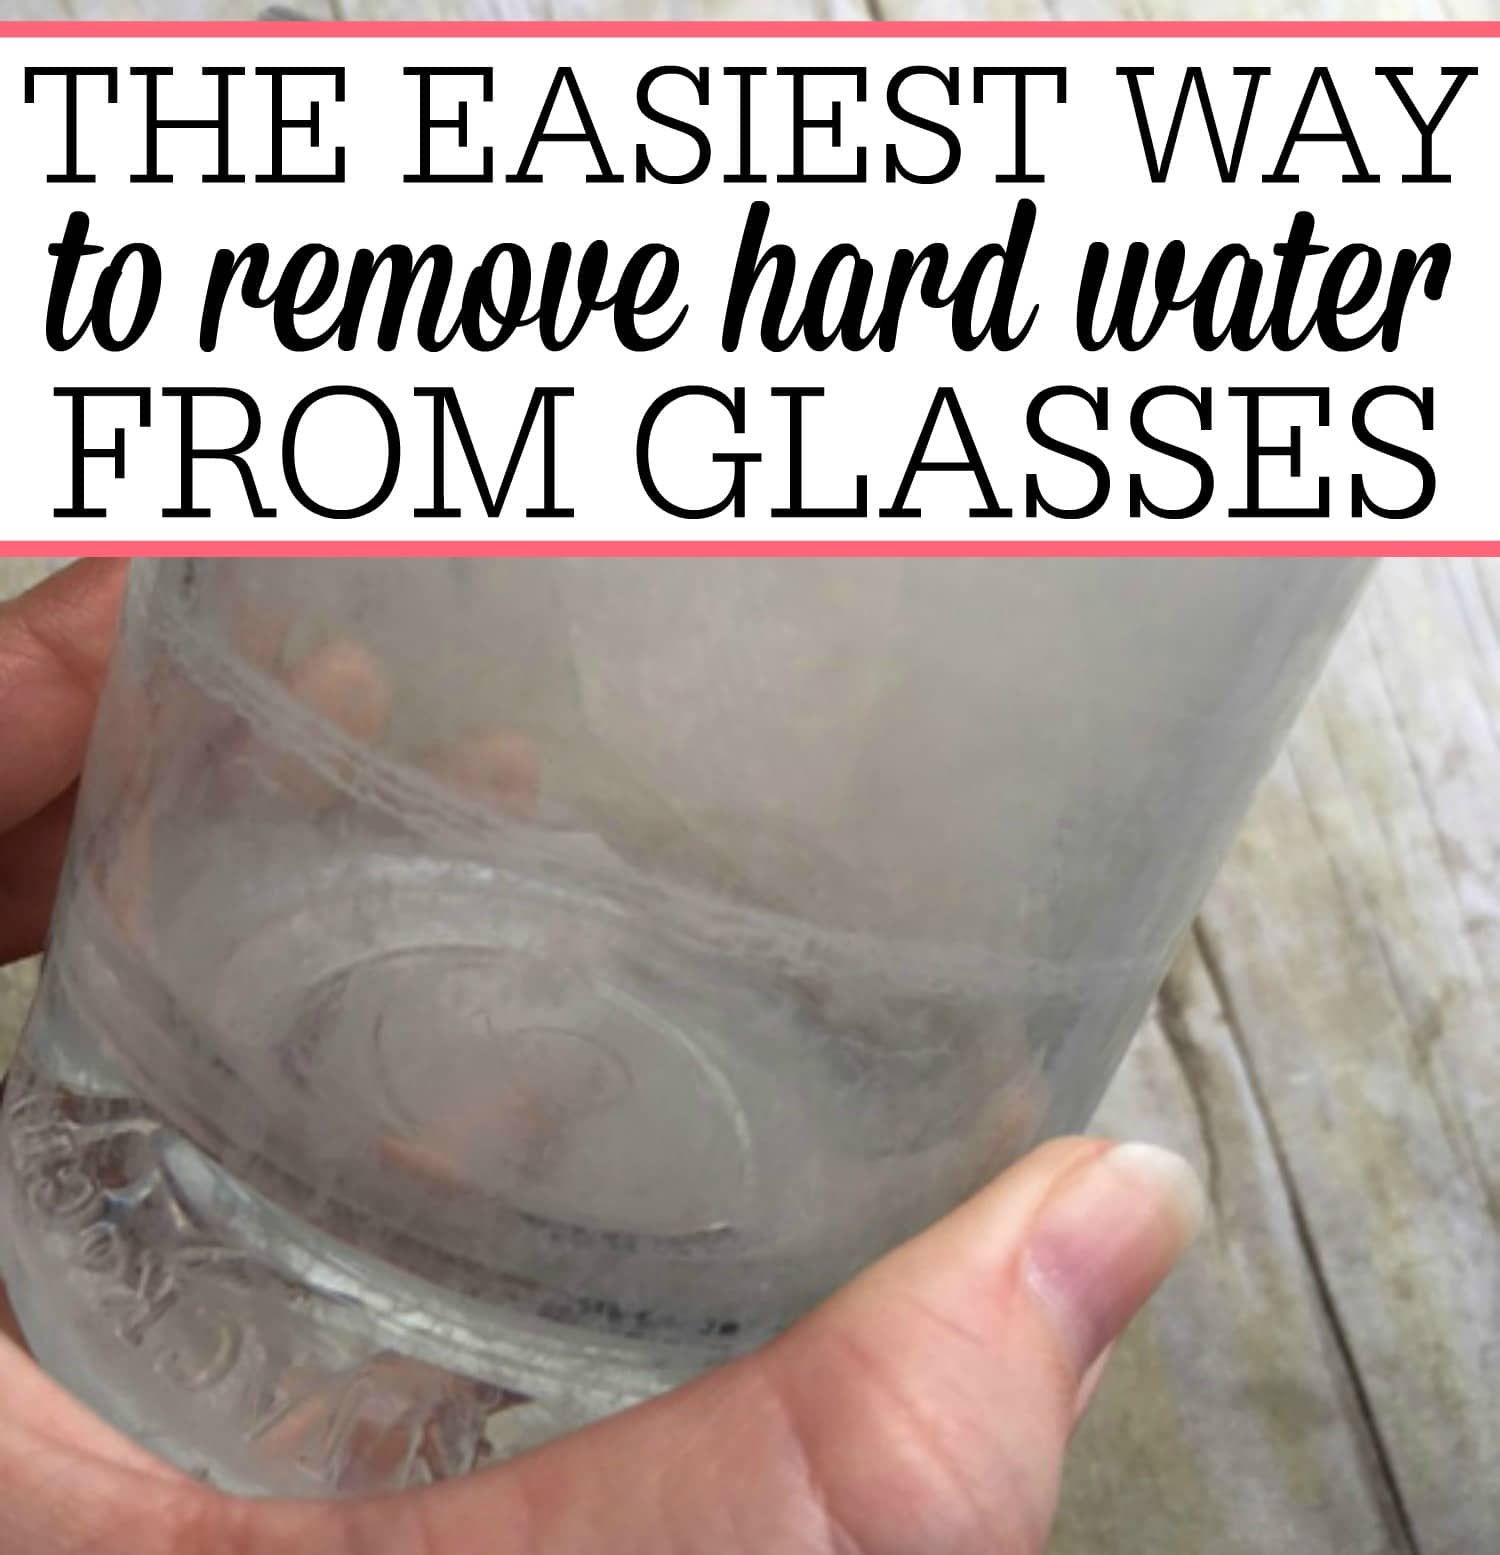 How To Remove Hard Water Stains From Glasses